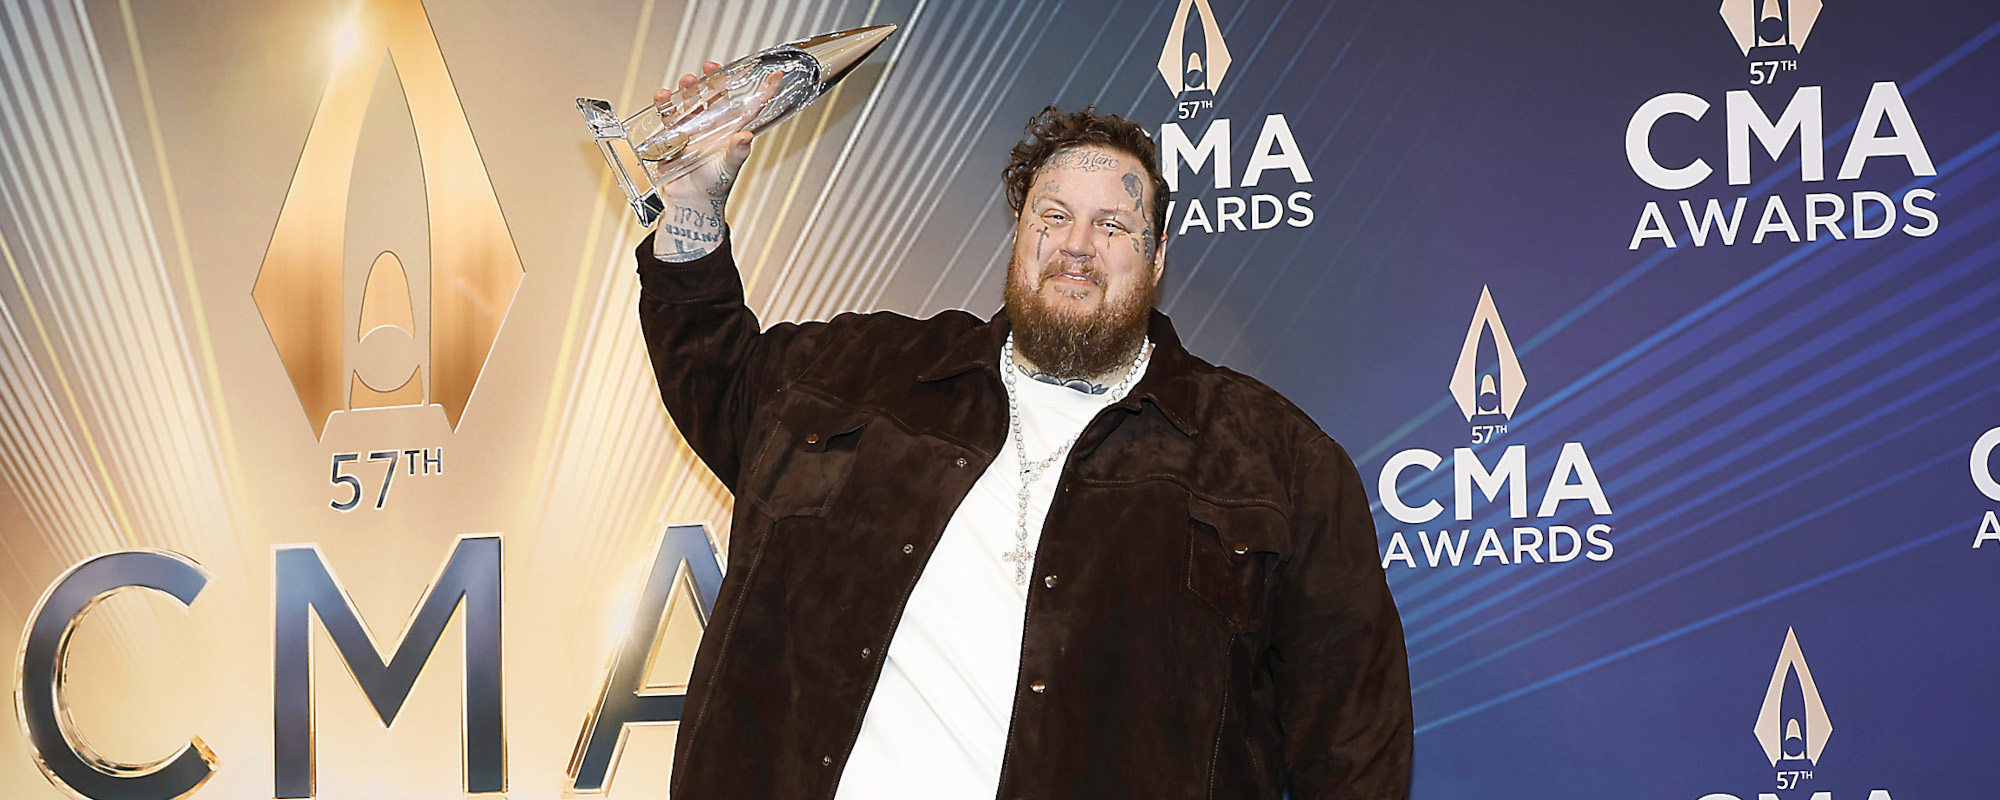 Exclusive: Jelly Roll Reveals the Strangest Place He’s Been Congratulated on His CMA Award Win